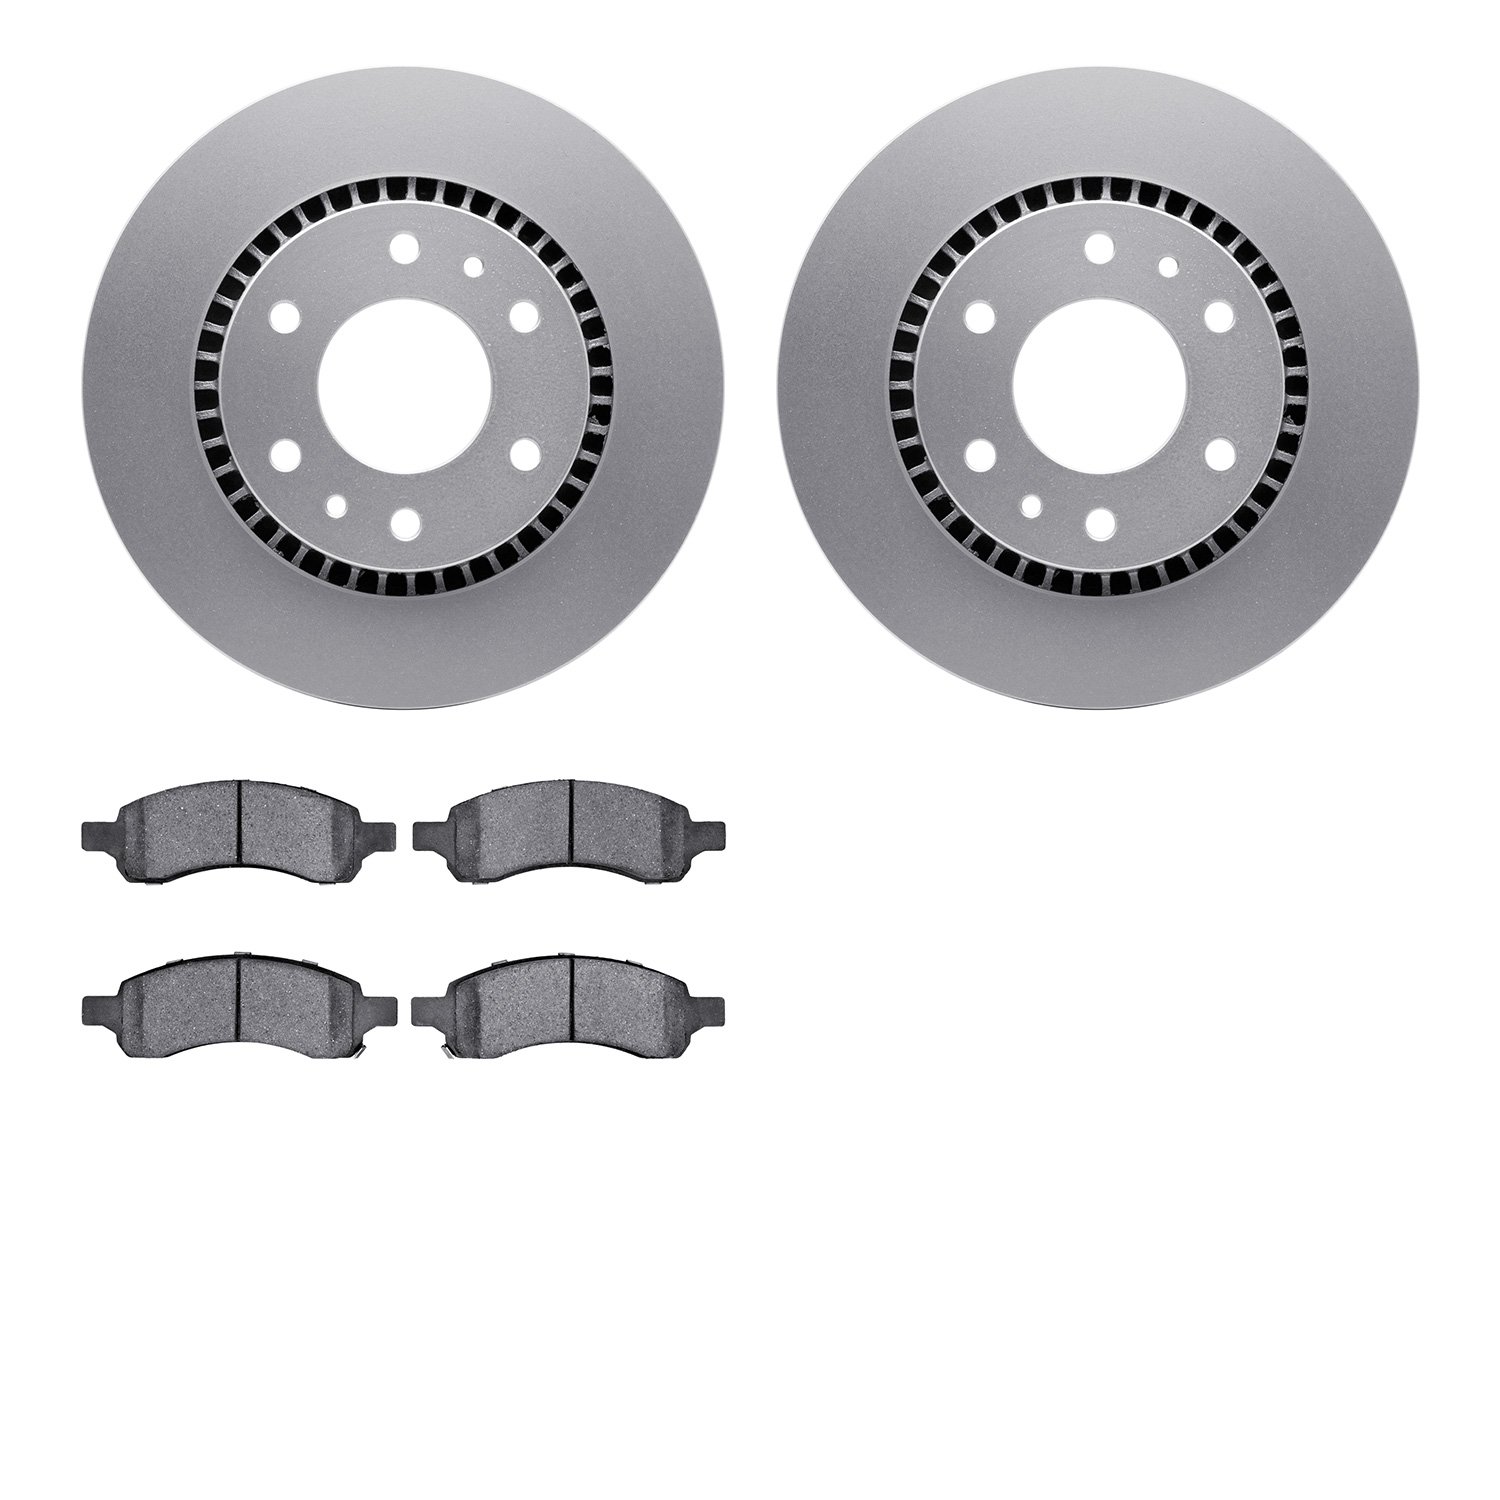 4402-48025 Geospec Brake Rotors with Ultimate-Duty Brake Pads Kit, 2006-2009 GM, Position: Front